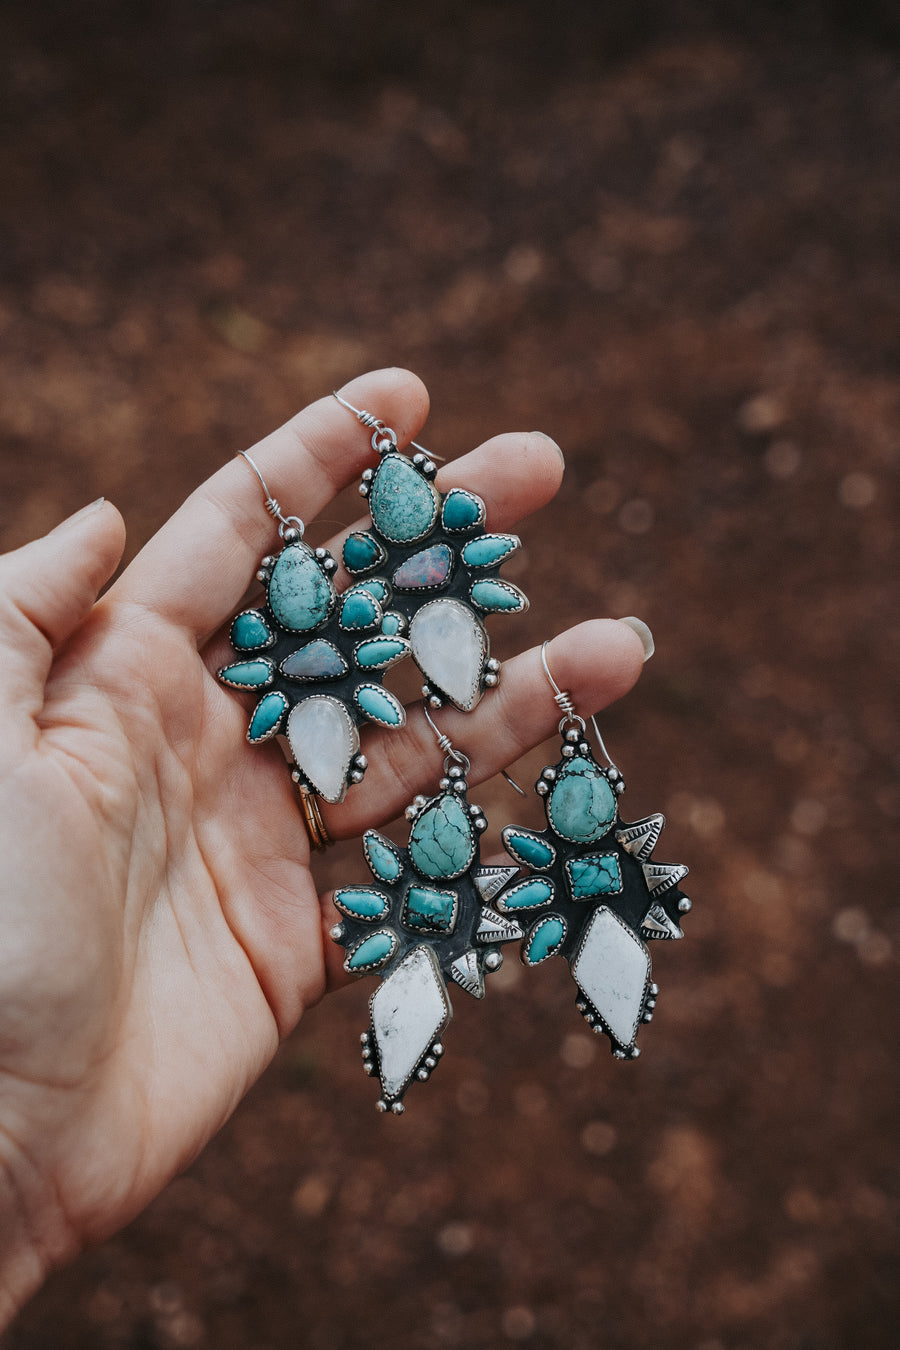 Statement Earrings in White Buffalo, Campitos, Hubei, and Variscite Turquoise